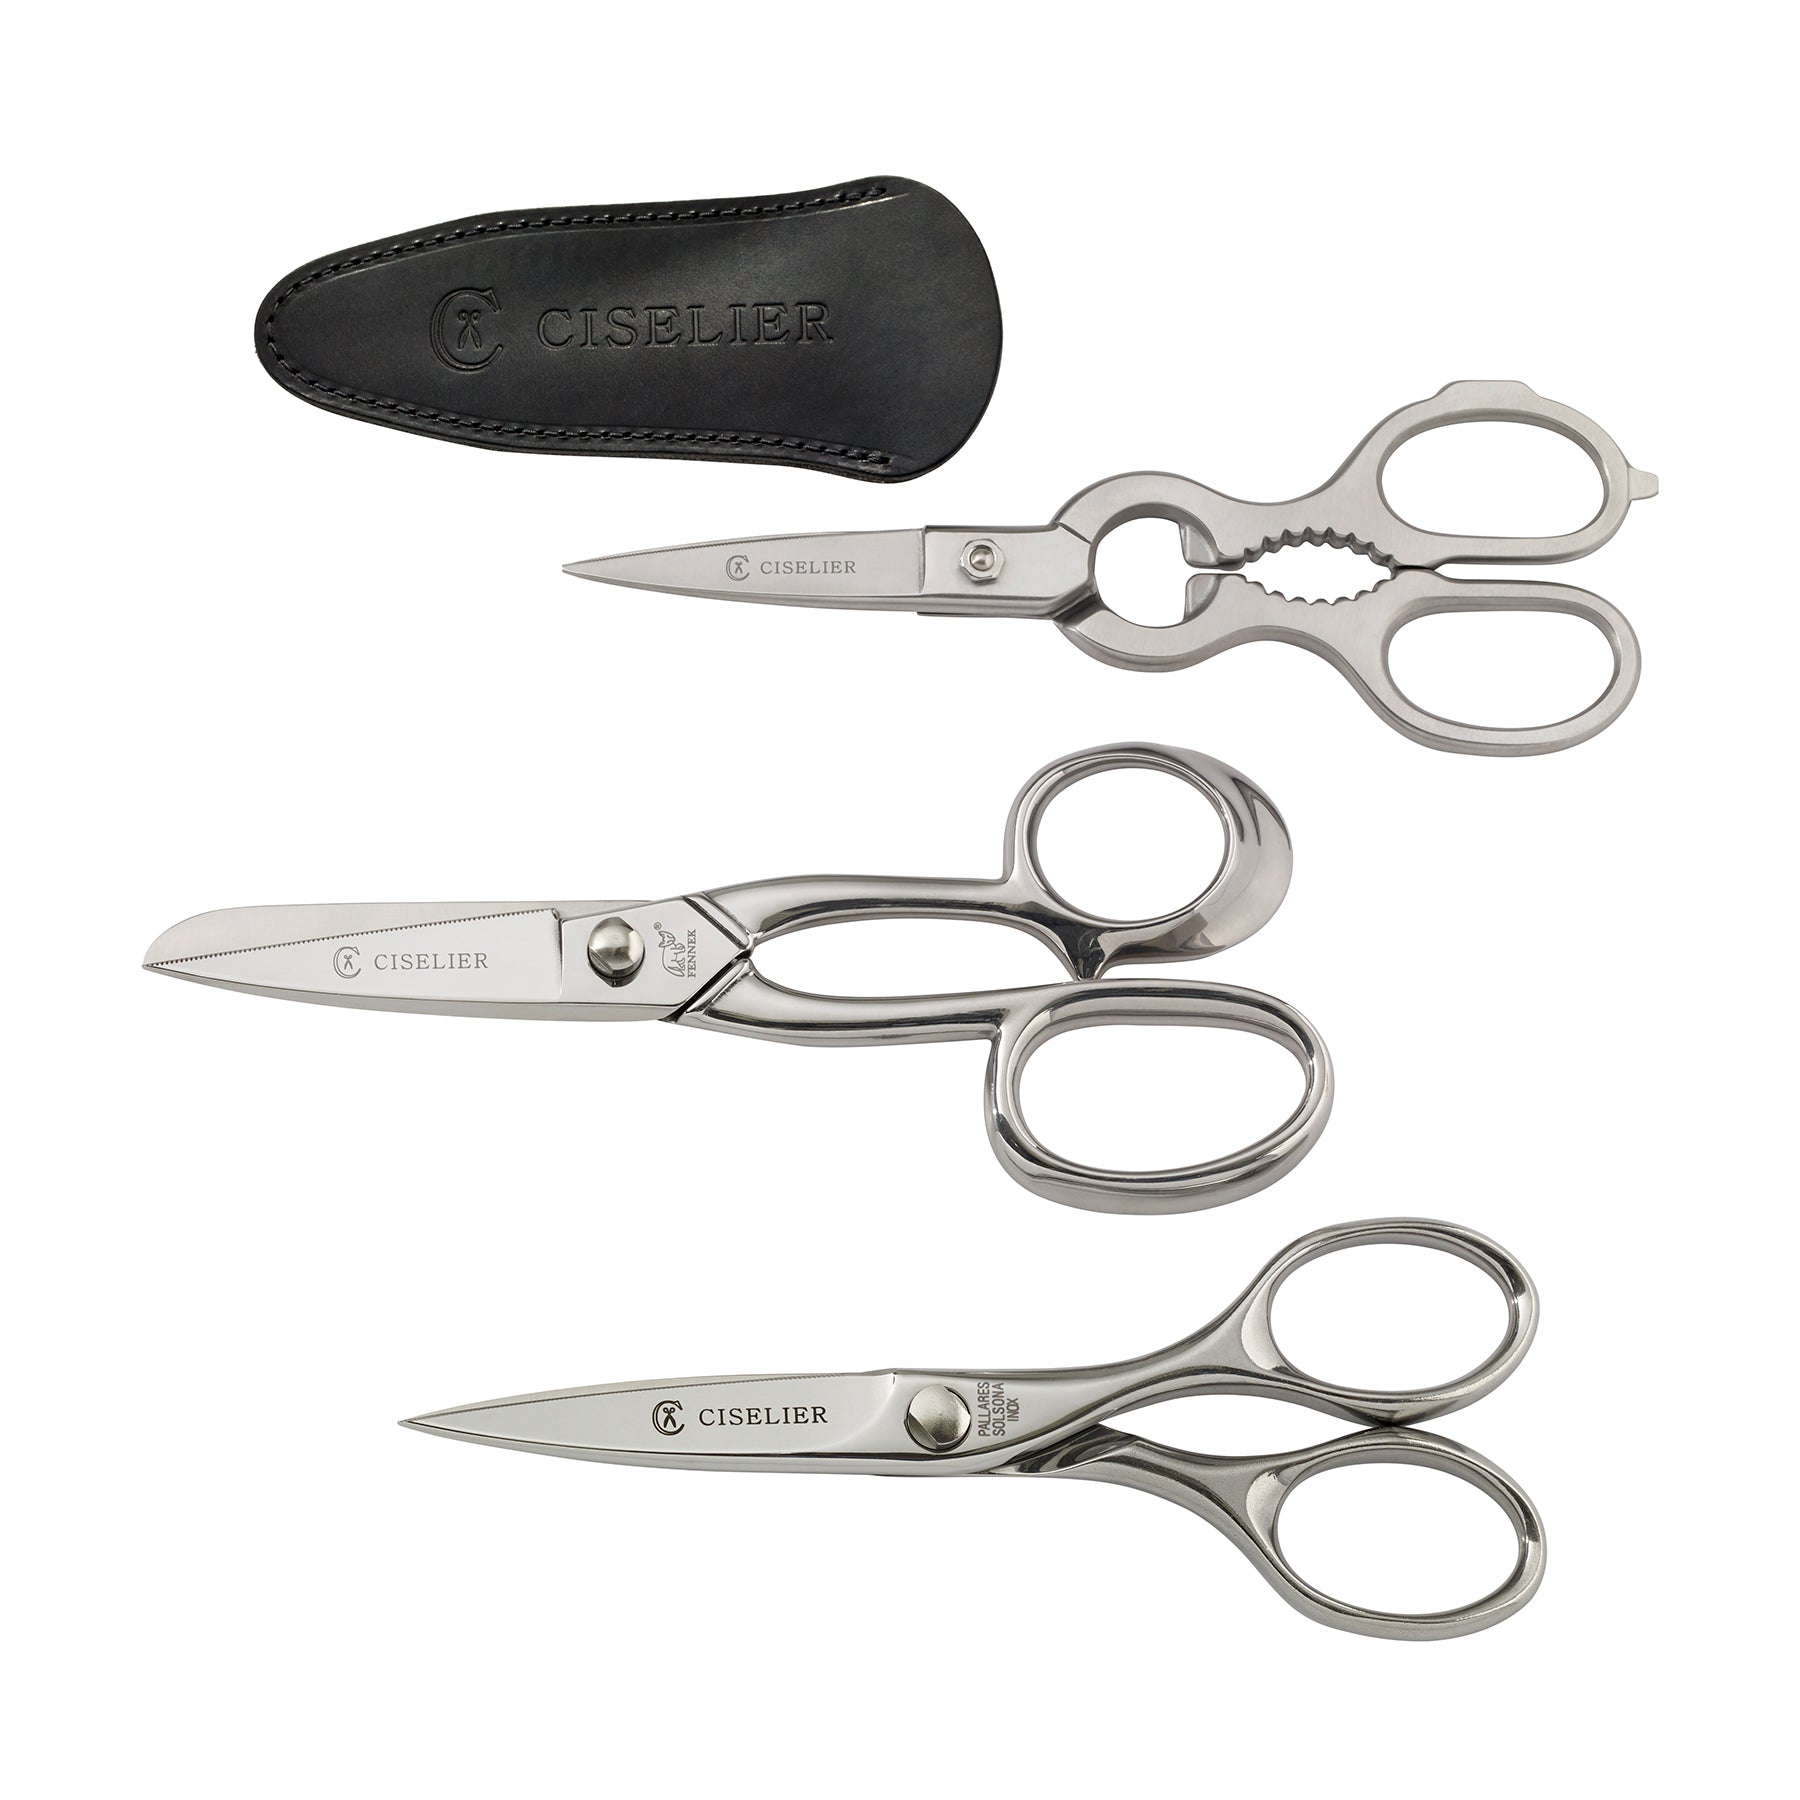 Video How-To: Top 5 Uses for Kitchen Scissors